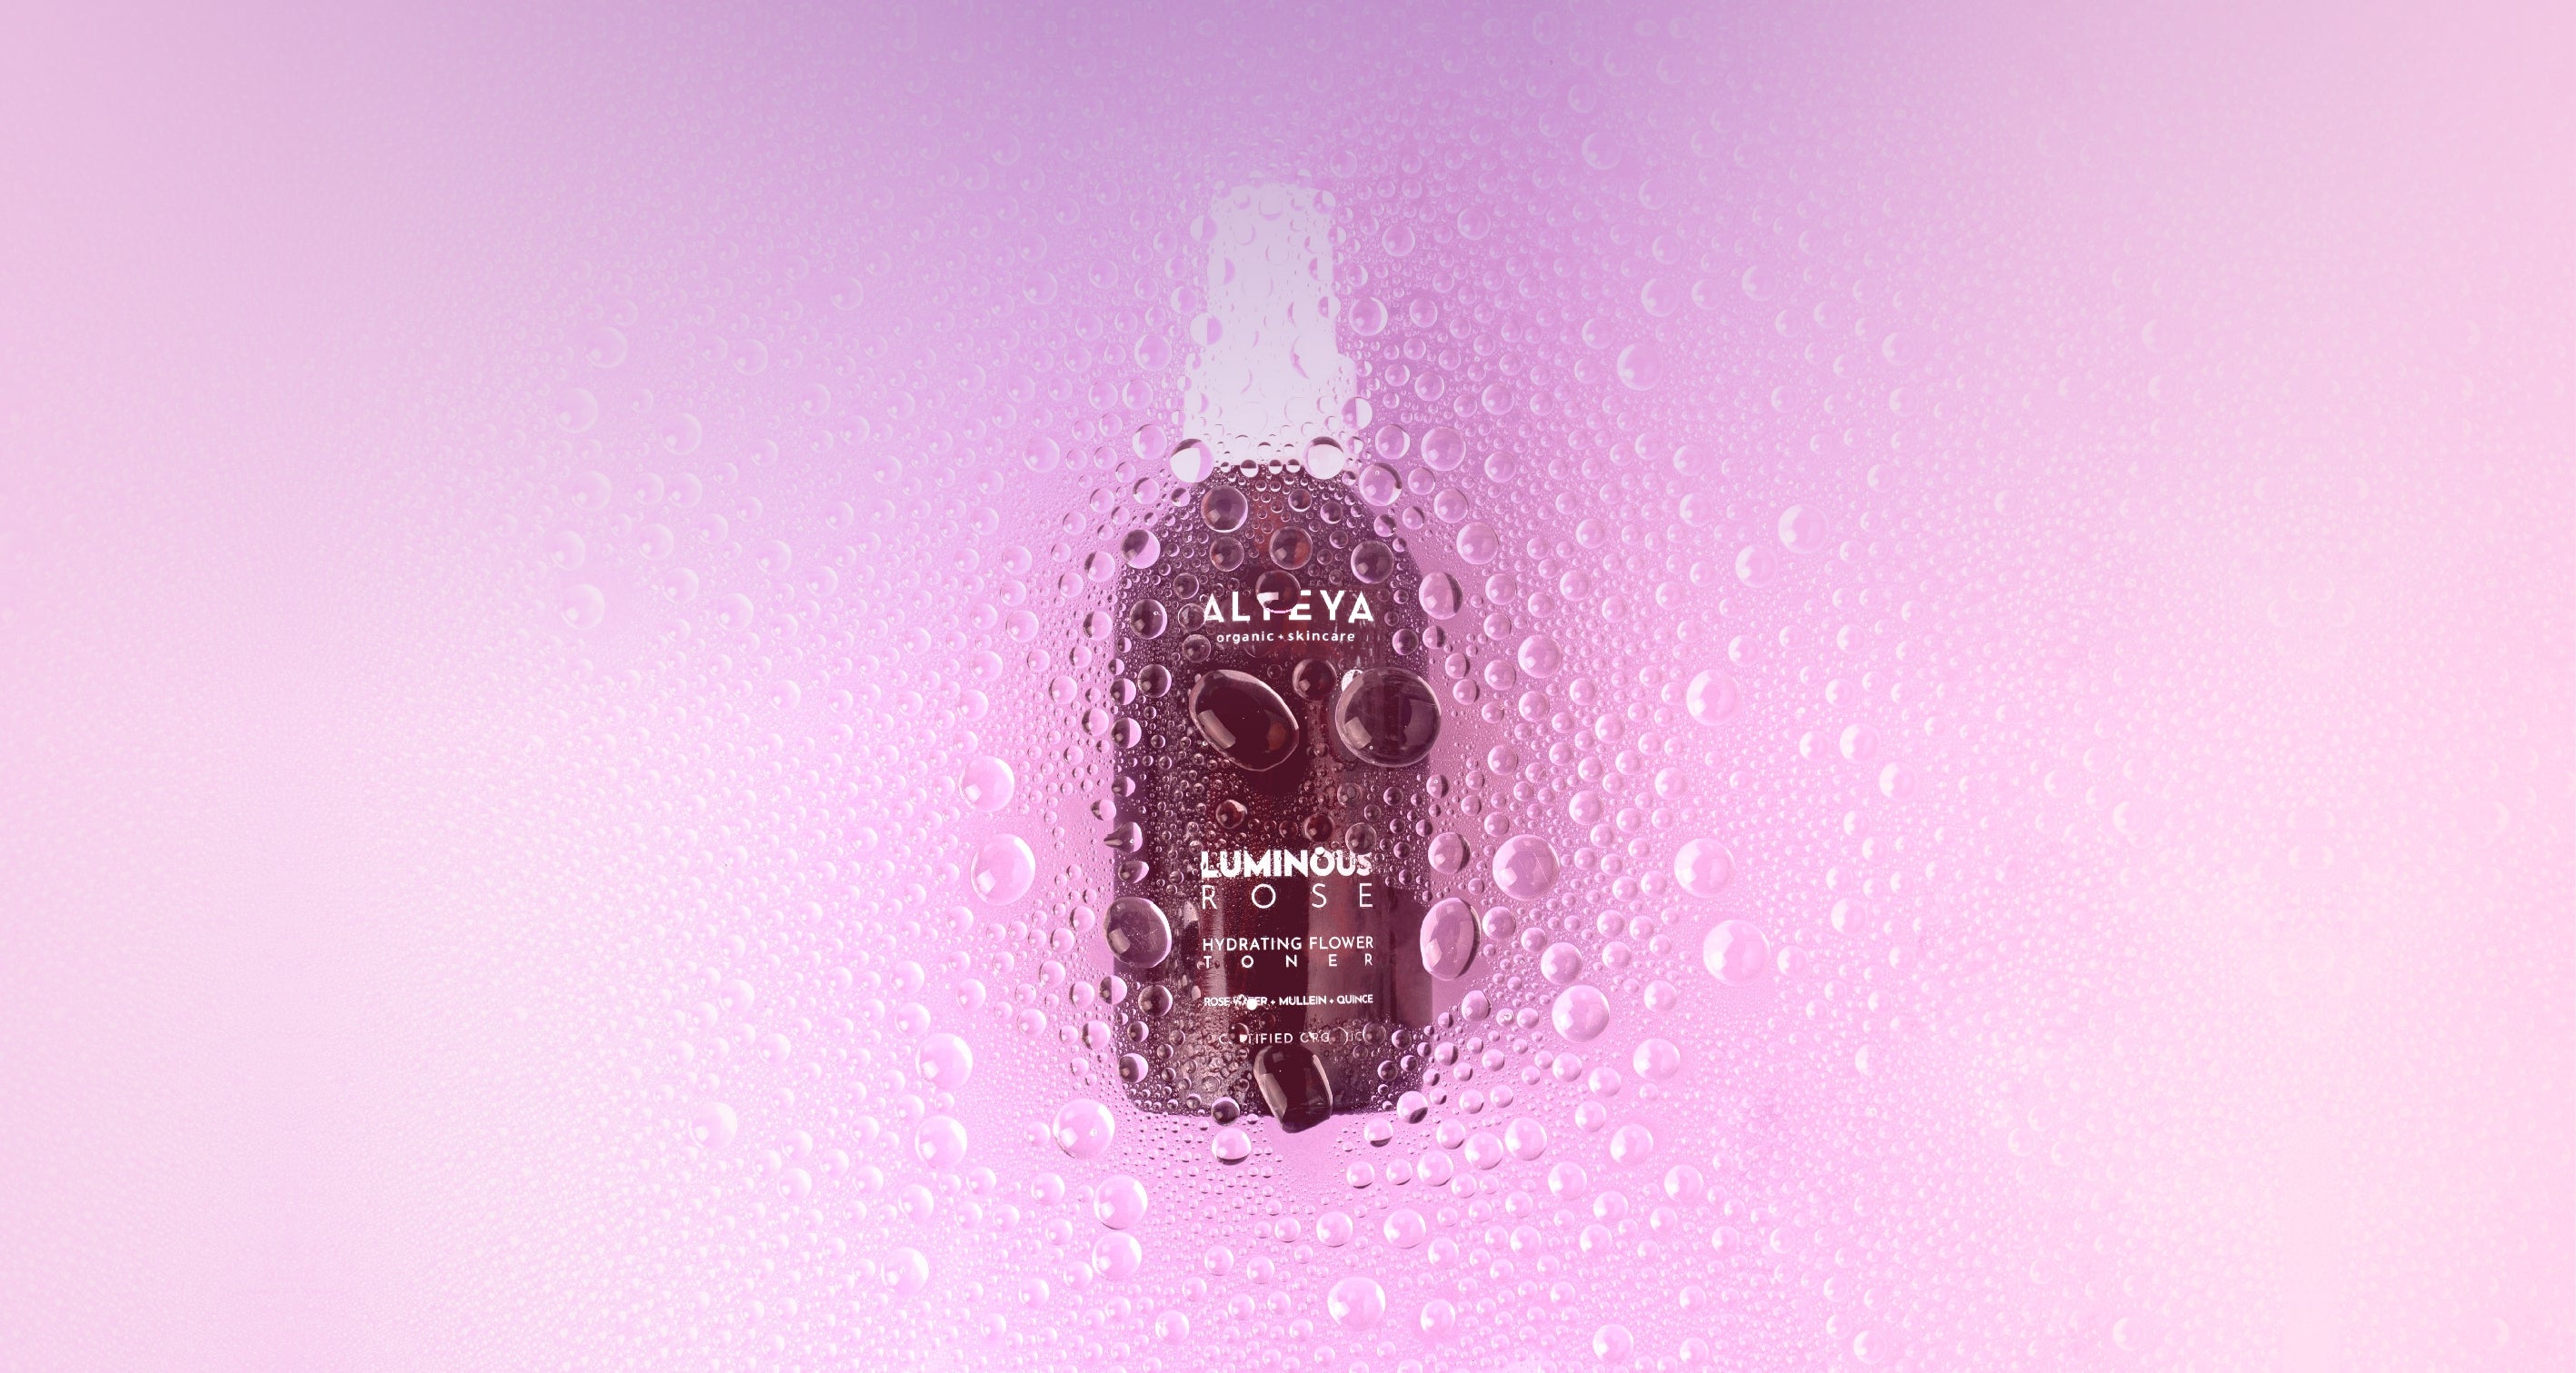 A bottle of water on a pink background.